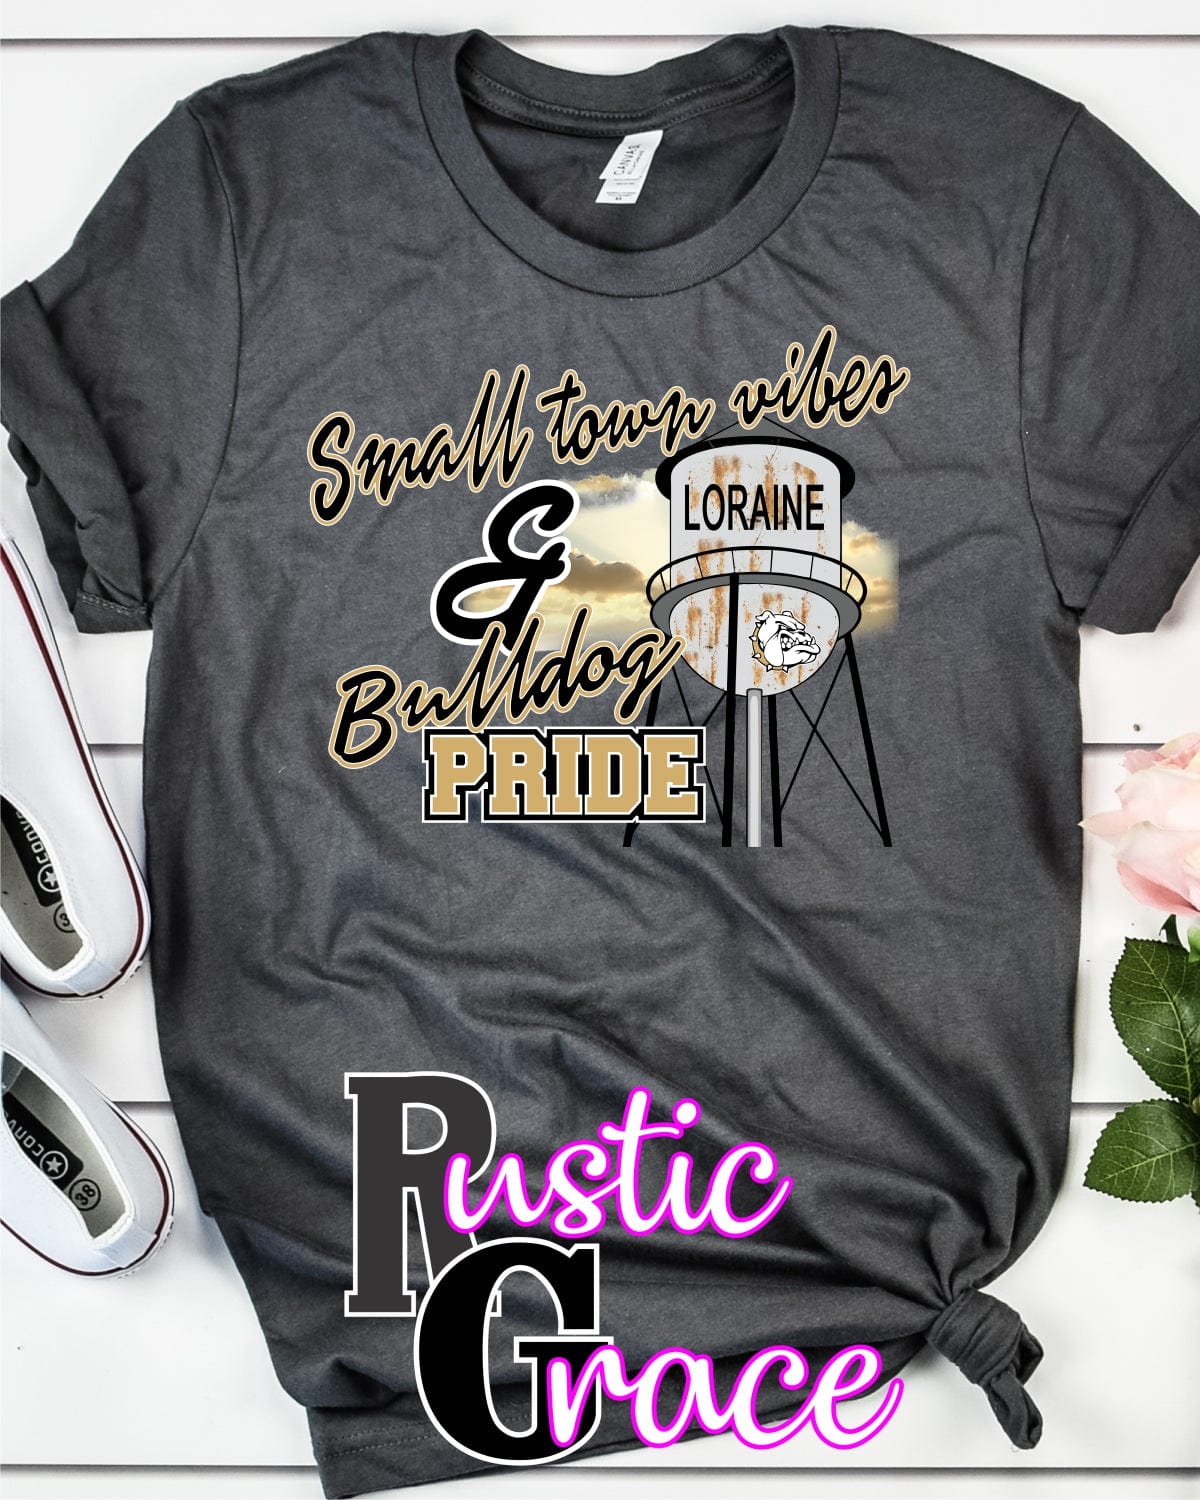 Small Town Vibes & Bluejays Pride Transfer – Rustic Grace Heat Transfer  Company